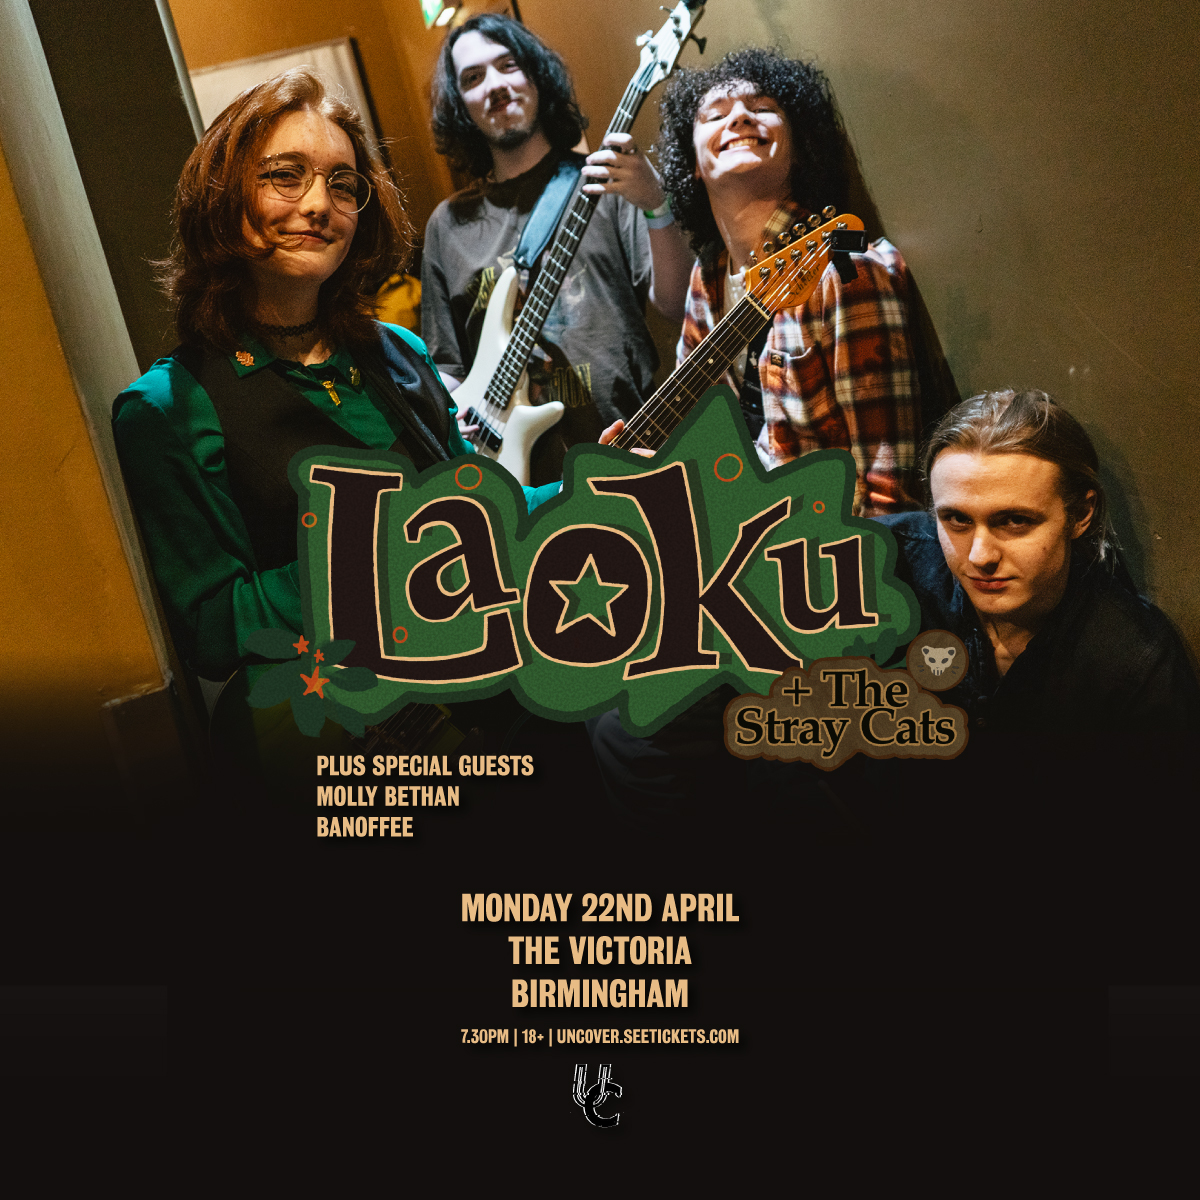 ONE WEEK TO GO 💙 Laoku + The Stray Cats headline @TheVictoria, Birmingham, on Monday, 22nd April, with special guests Molly Bethan and Banoffee 🎉 Tickets on sale now: bit.ly/3IY9hEC